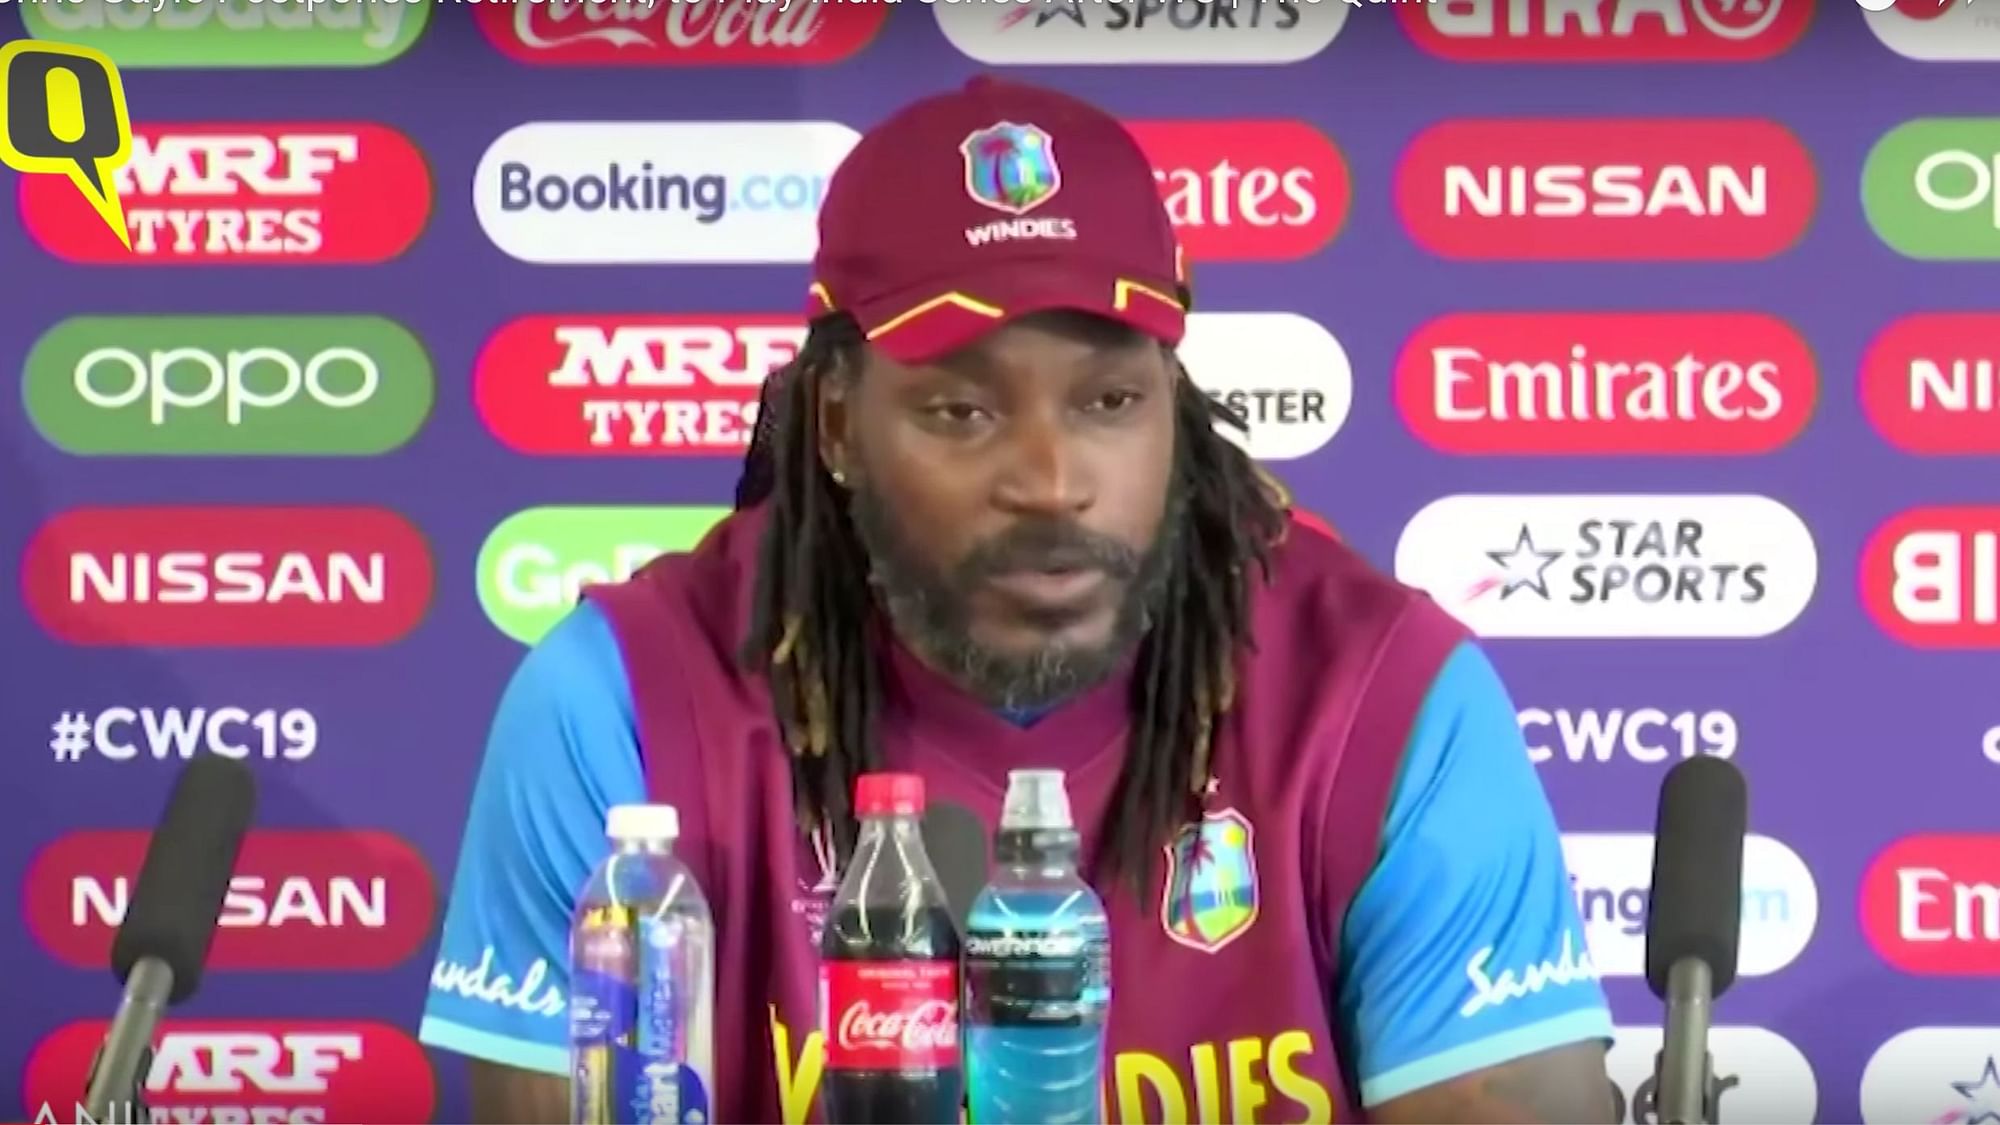 “I’m definitely up there,” said Chris Gayle when asked where he would rate himself among the greats of West Indian cricket.